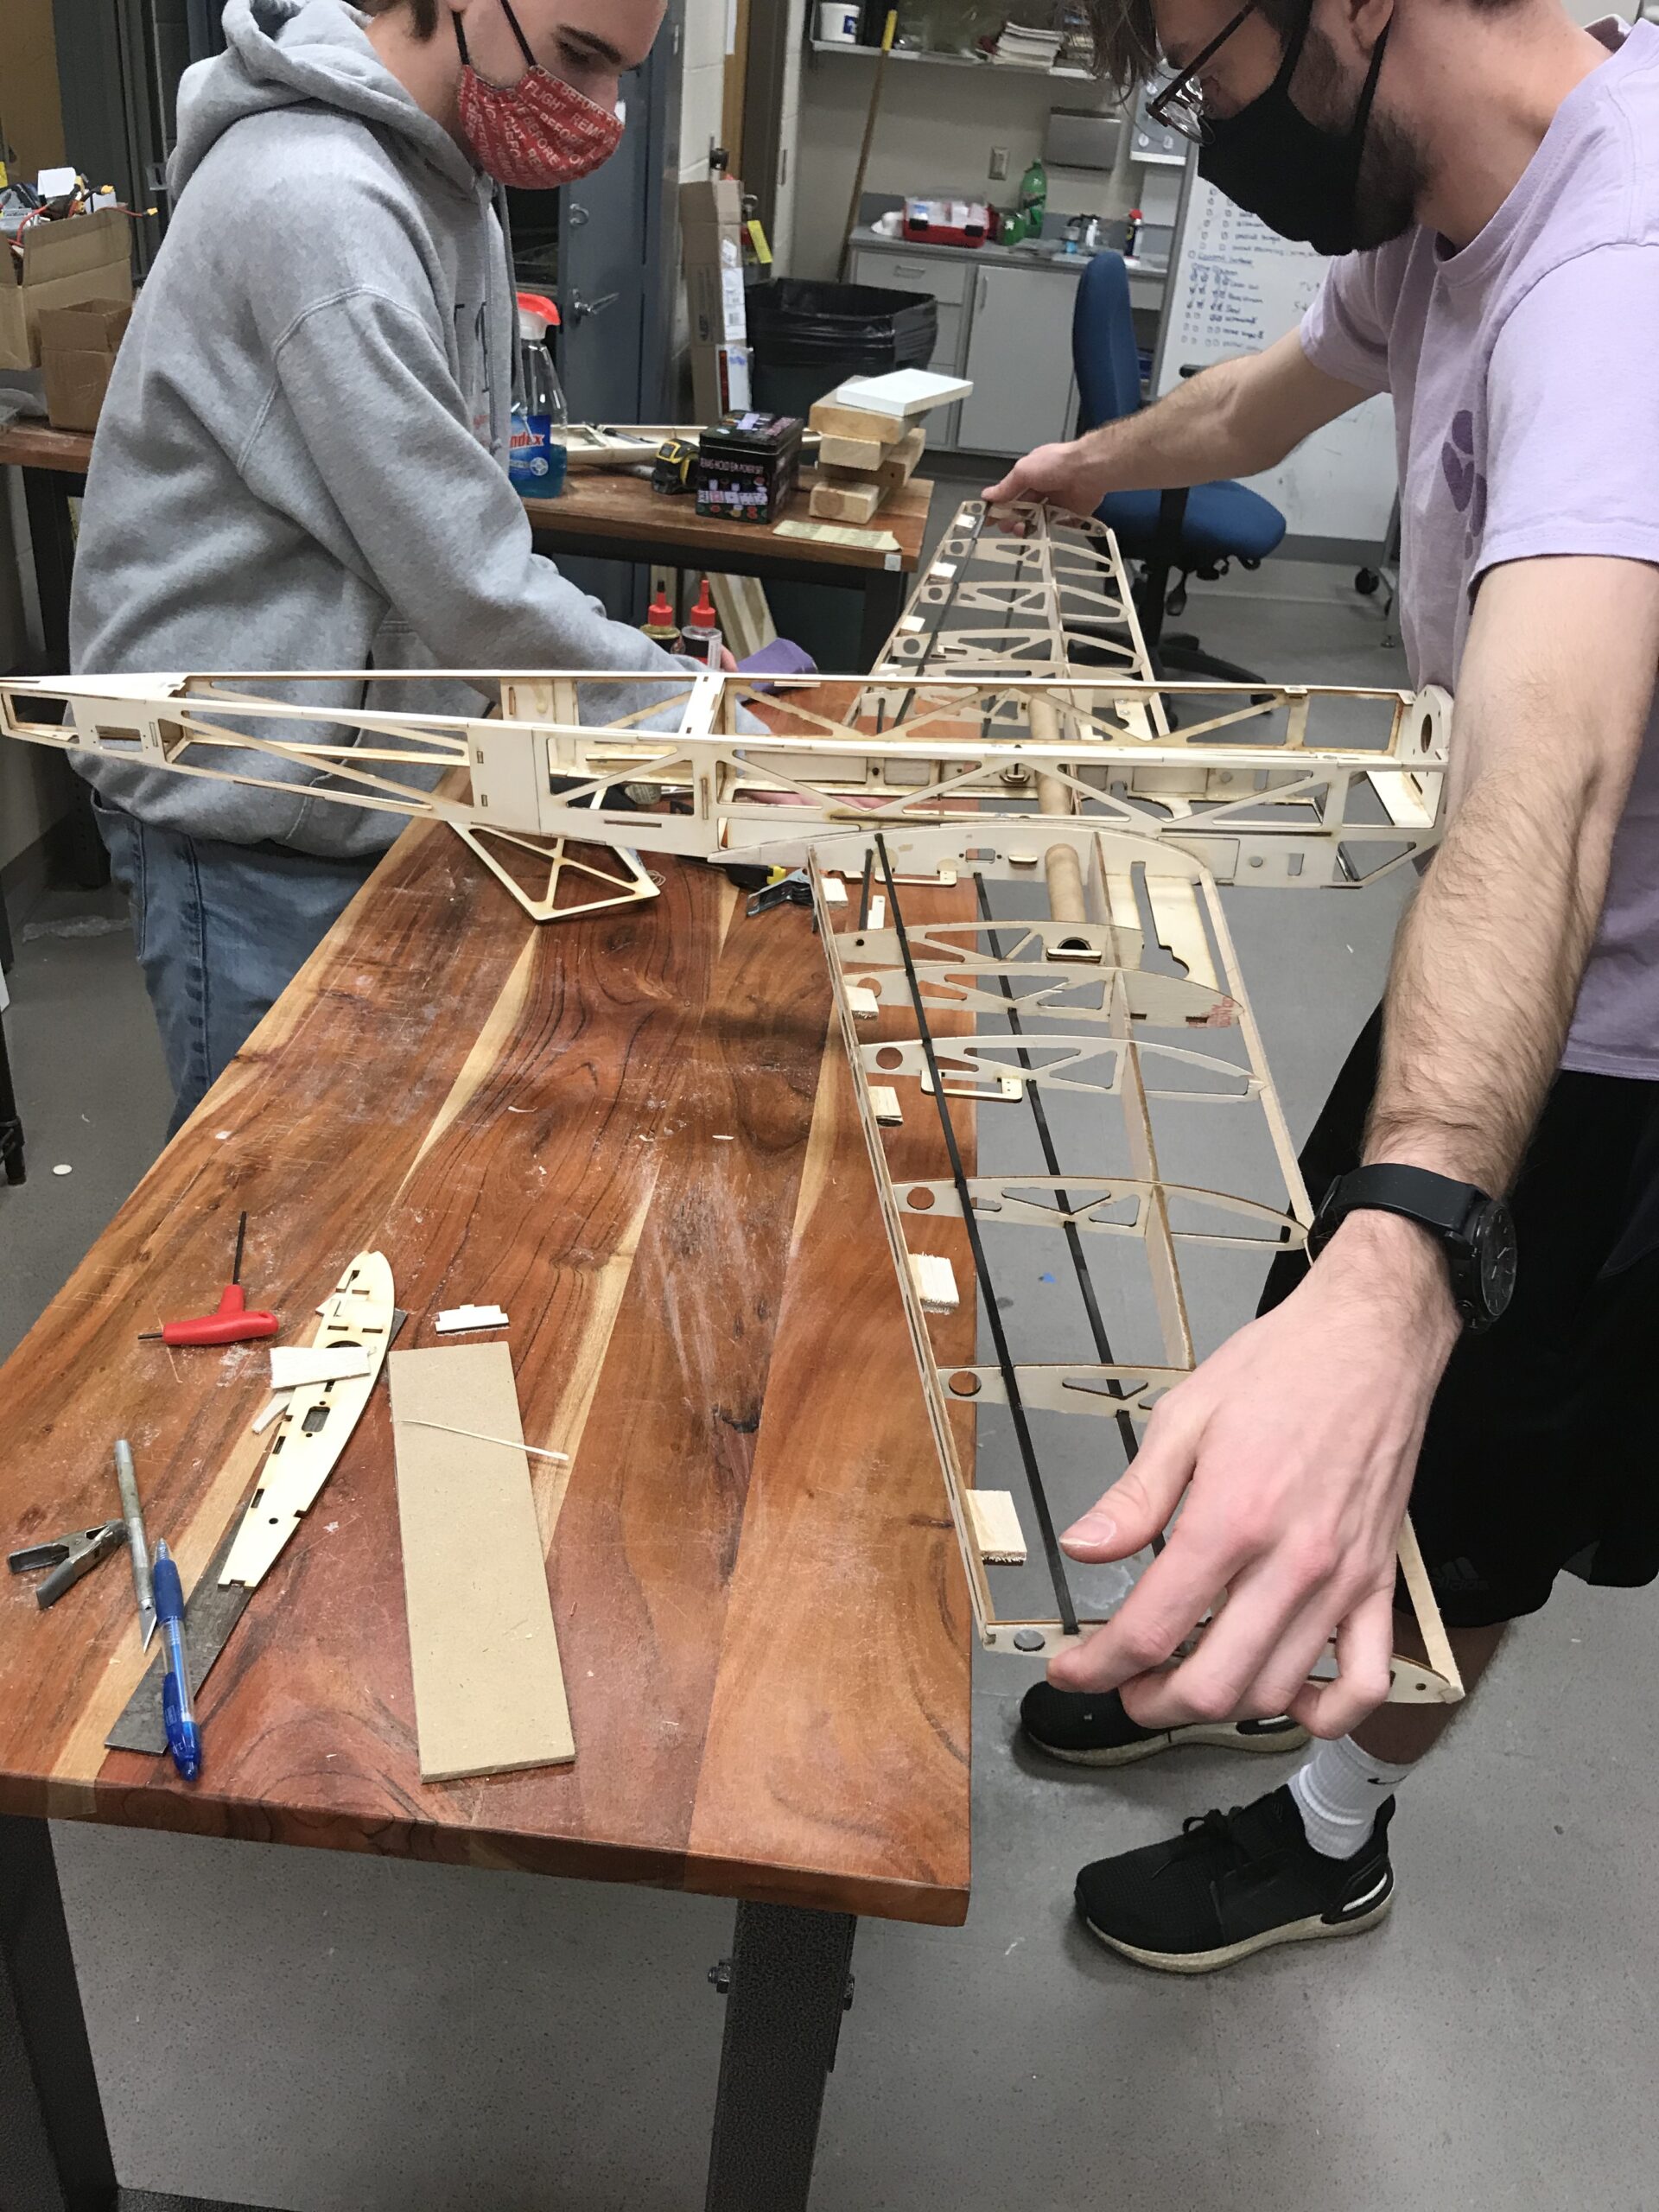 NC State AIAA team members construct the frame of their remote-controlled flyer, Airwolf, built for the 2021 AIAA Design, Build, Fly competition.